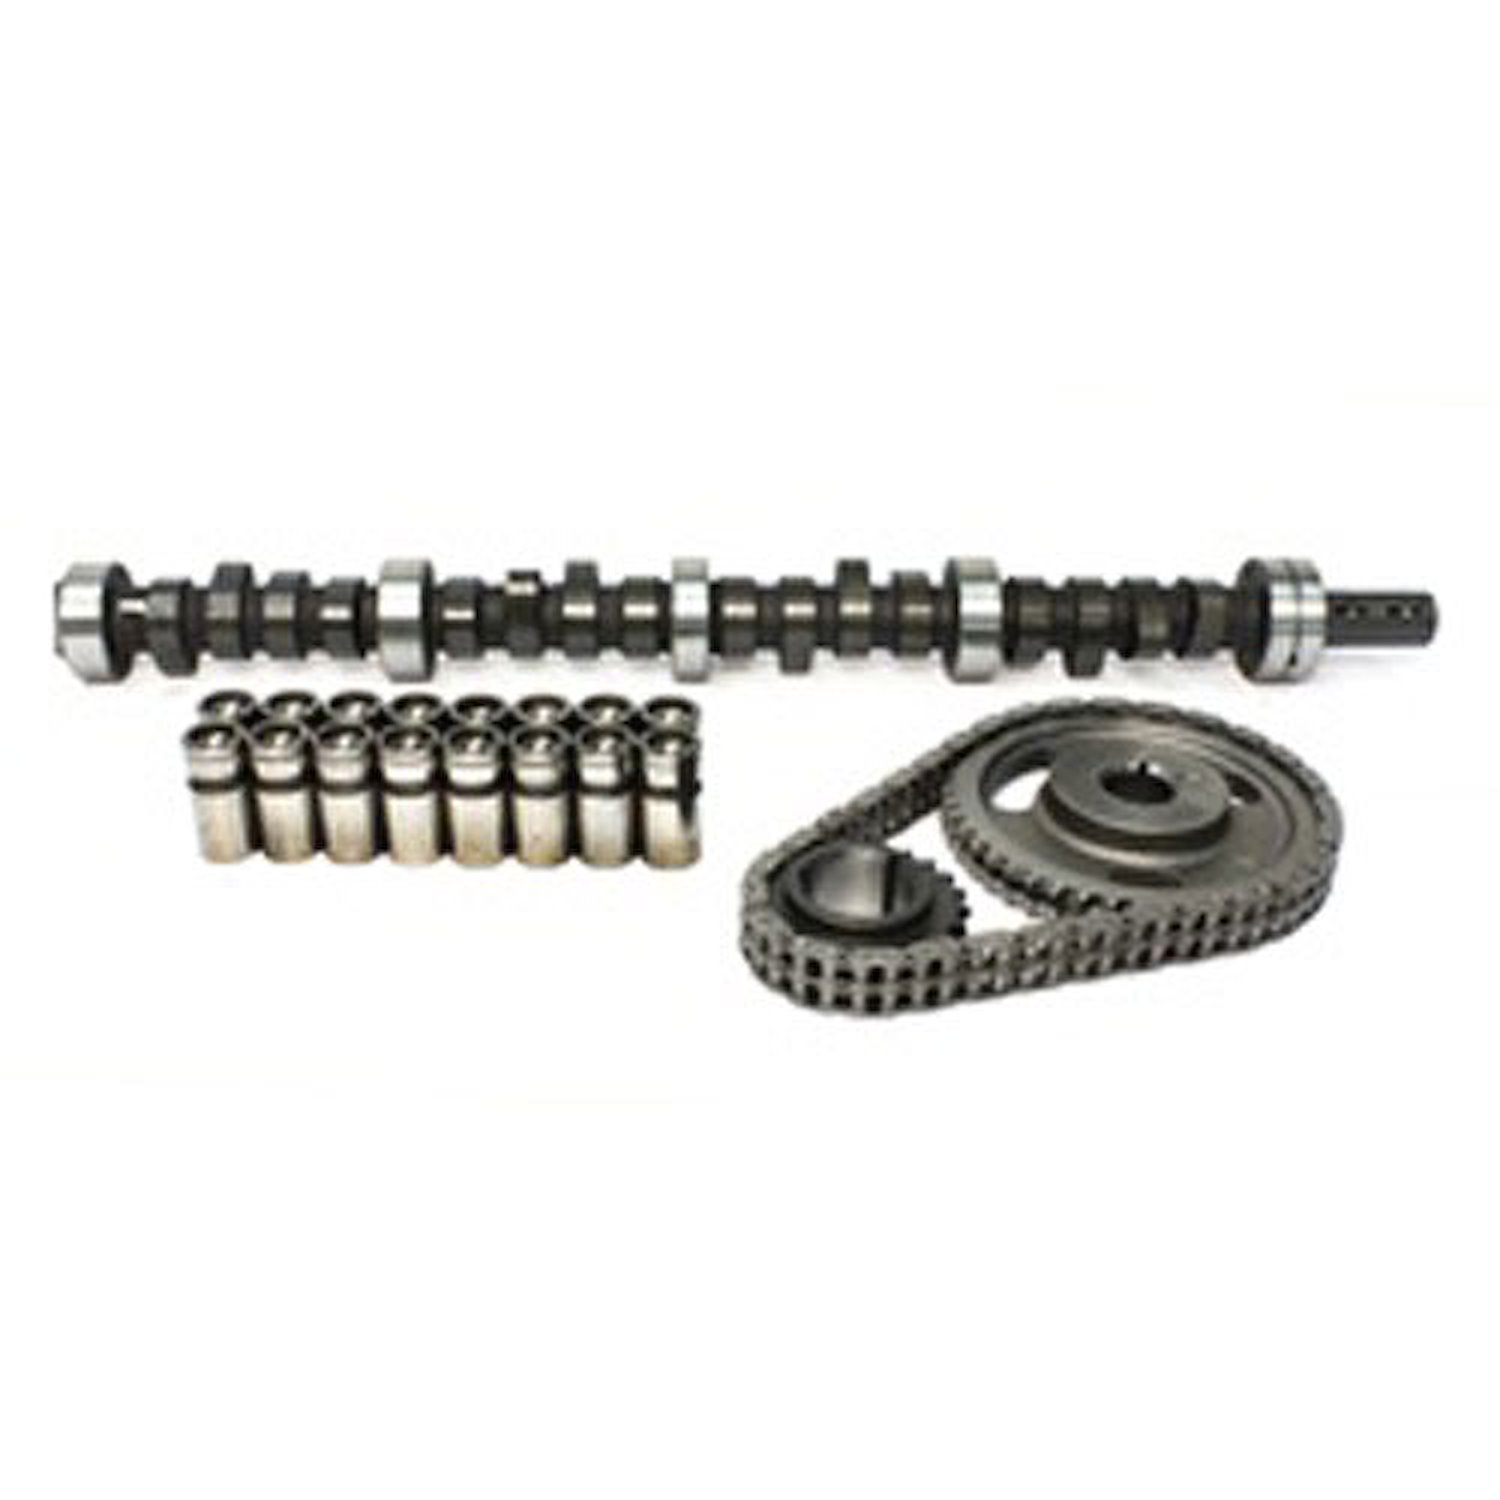 High Energy 260H Hydraulic Flat Tappet Camshaft Small Kit Lift: .447" /.447" Duration: 260°/260° RPM Range: 1200-5200